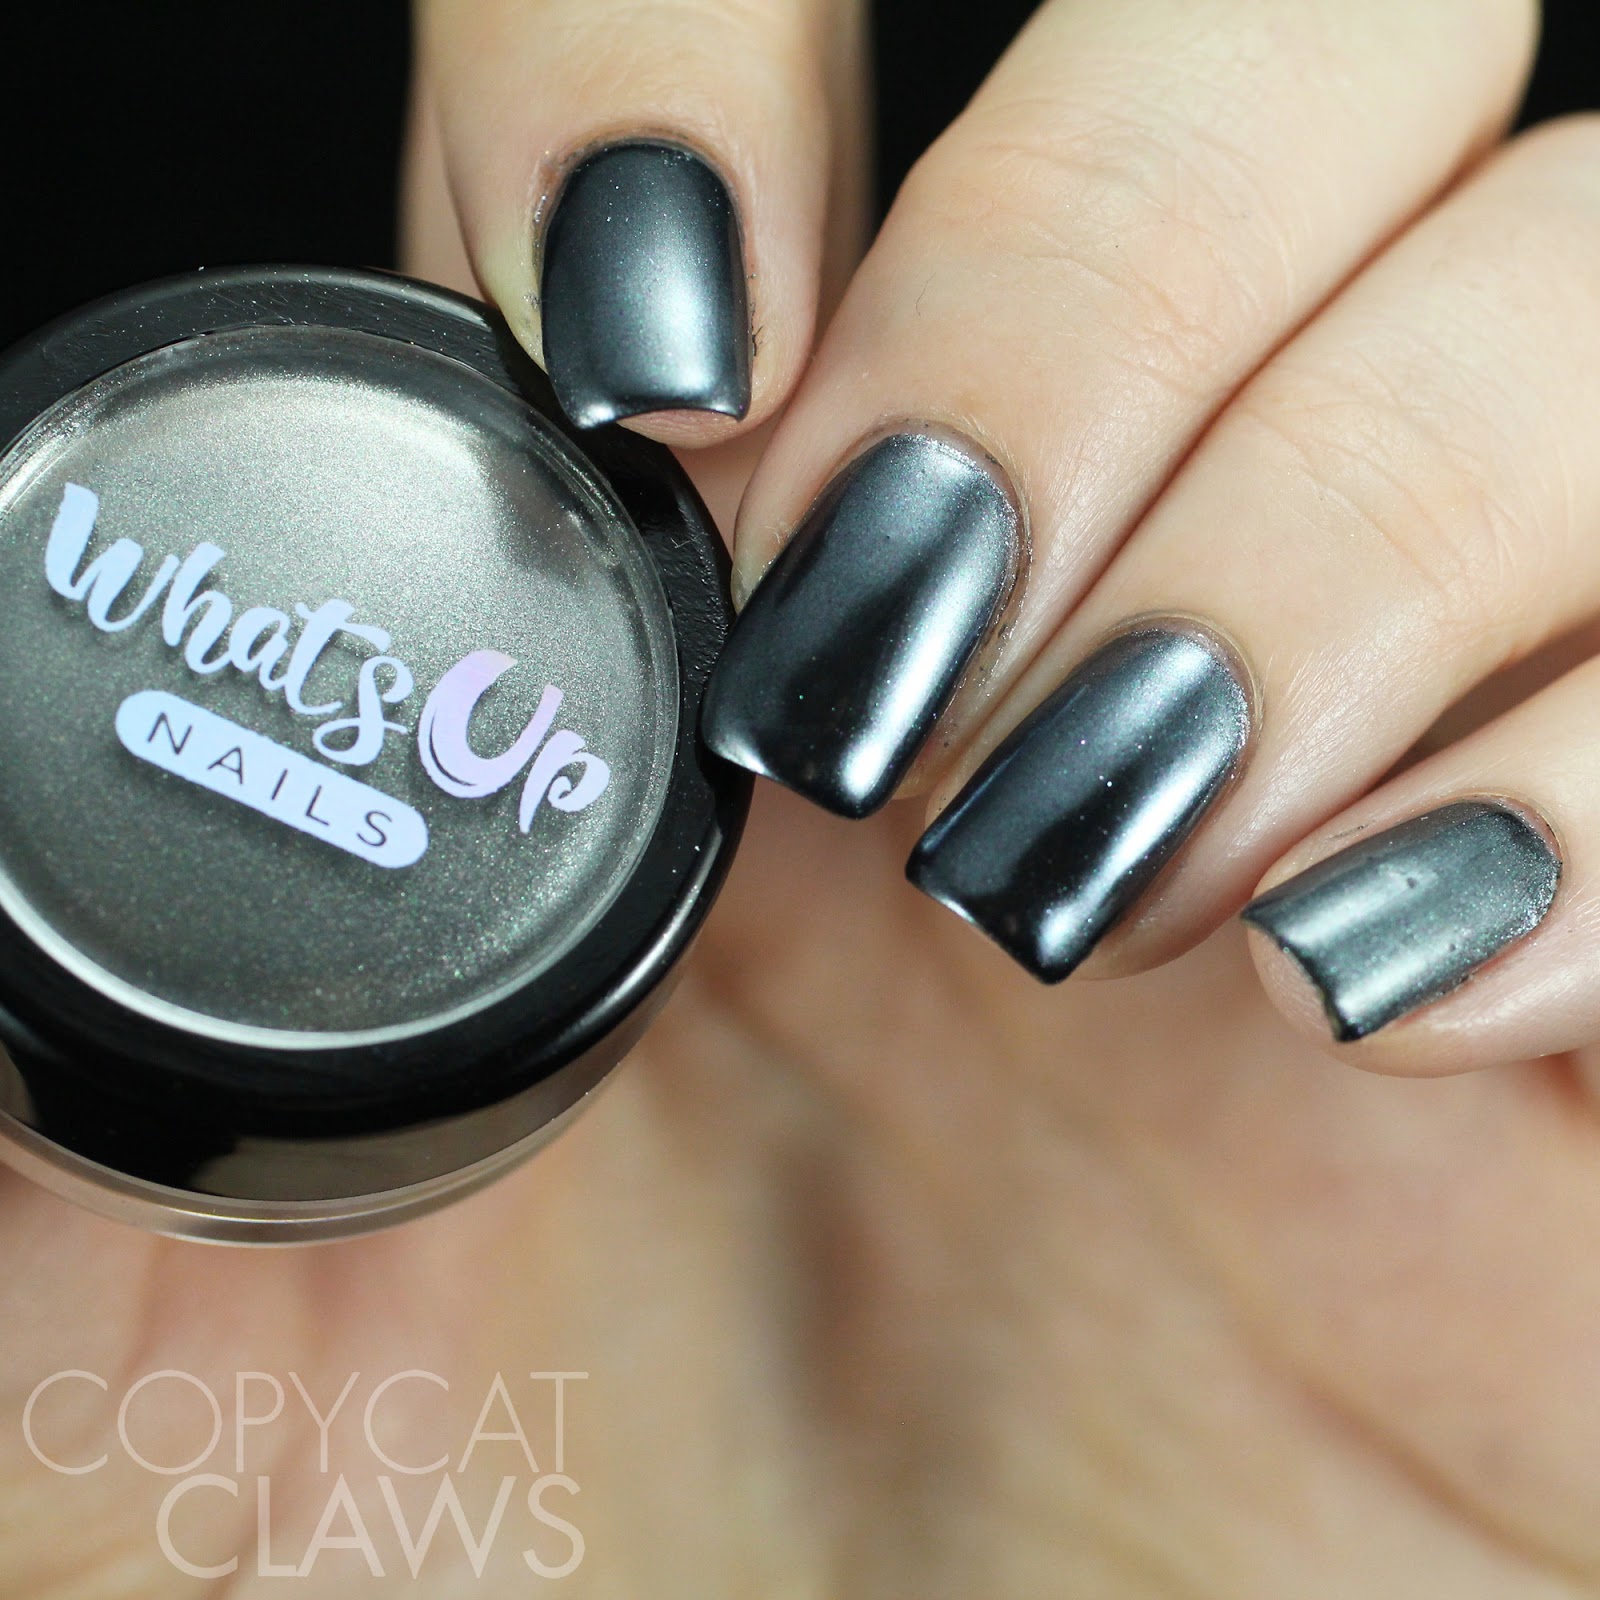 Copycat Claws: Whats Up Nails Black Chrome Powder and Stencil Review